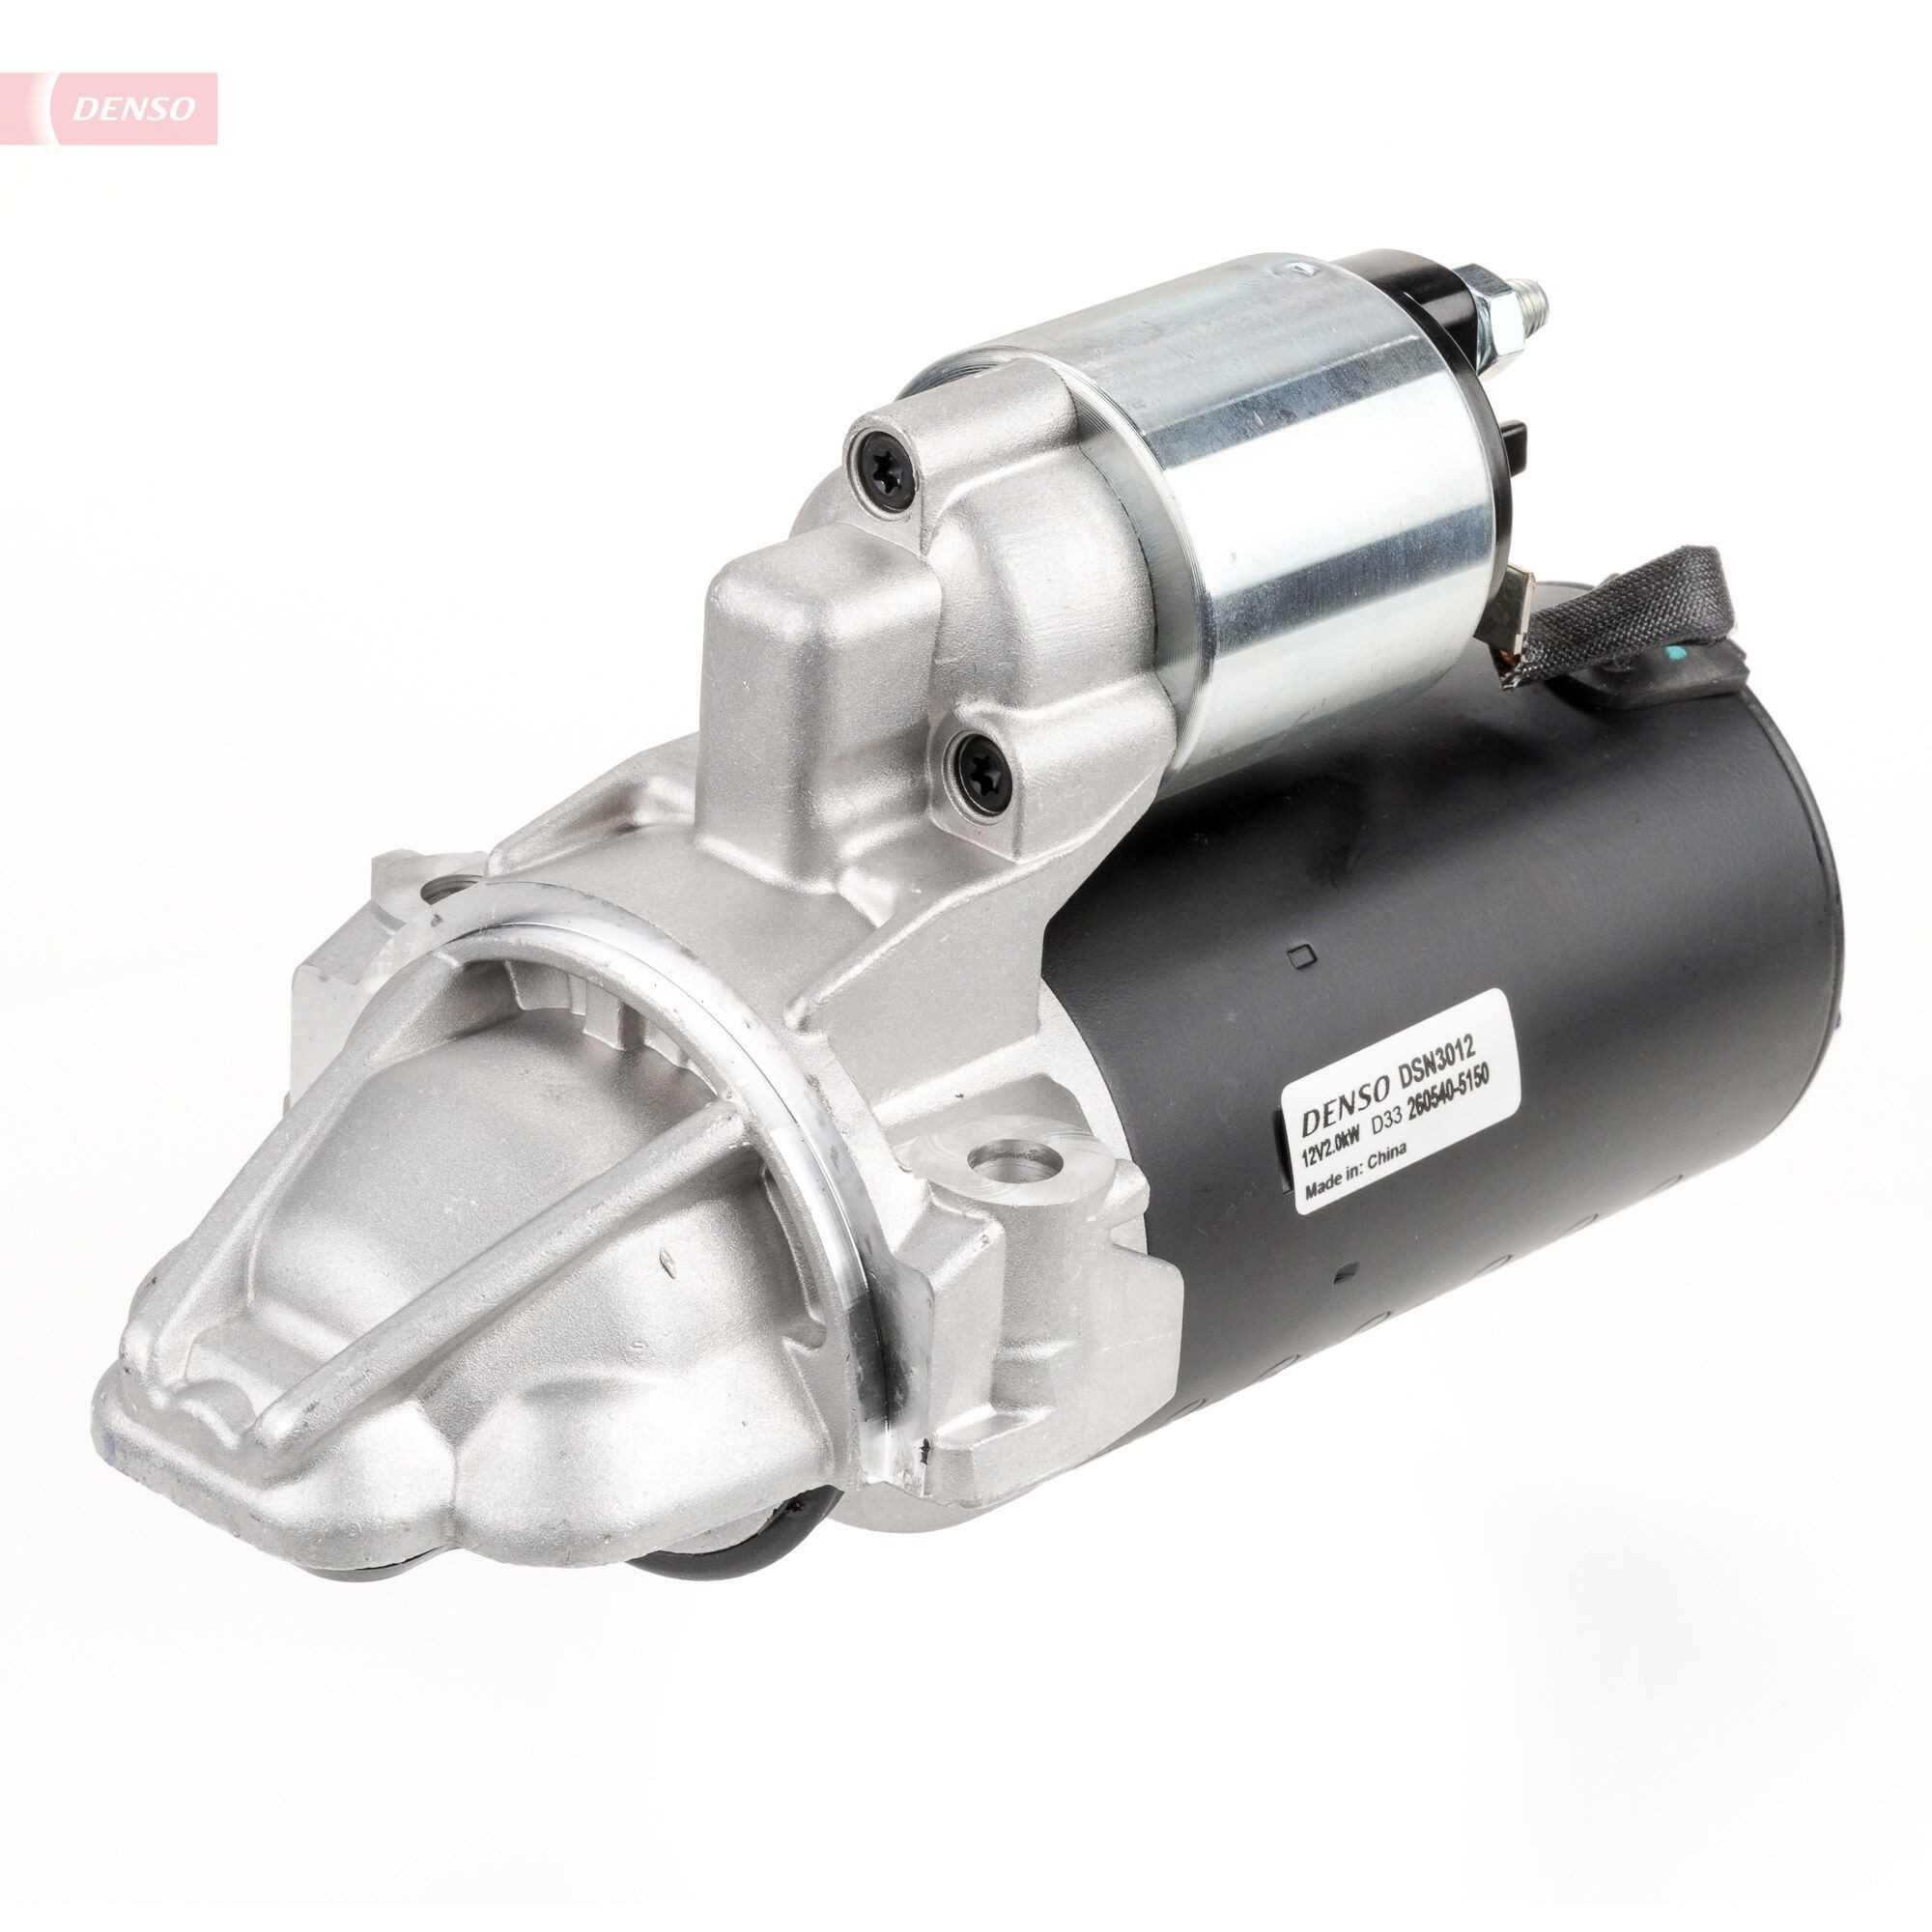 DENSO DSN3012 Starter motor FORD experience and price